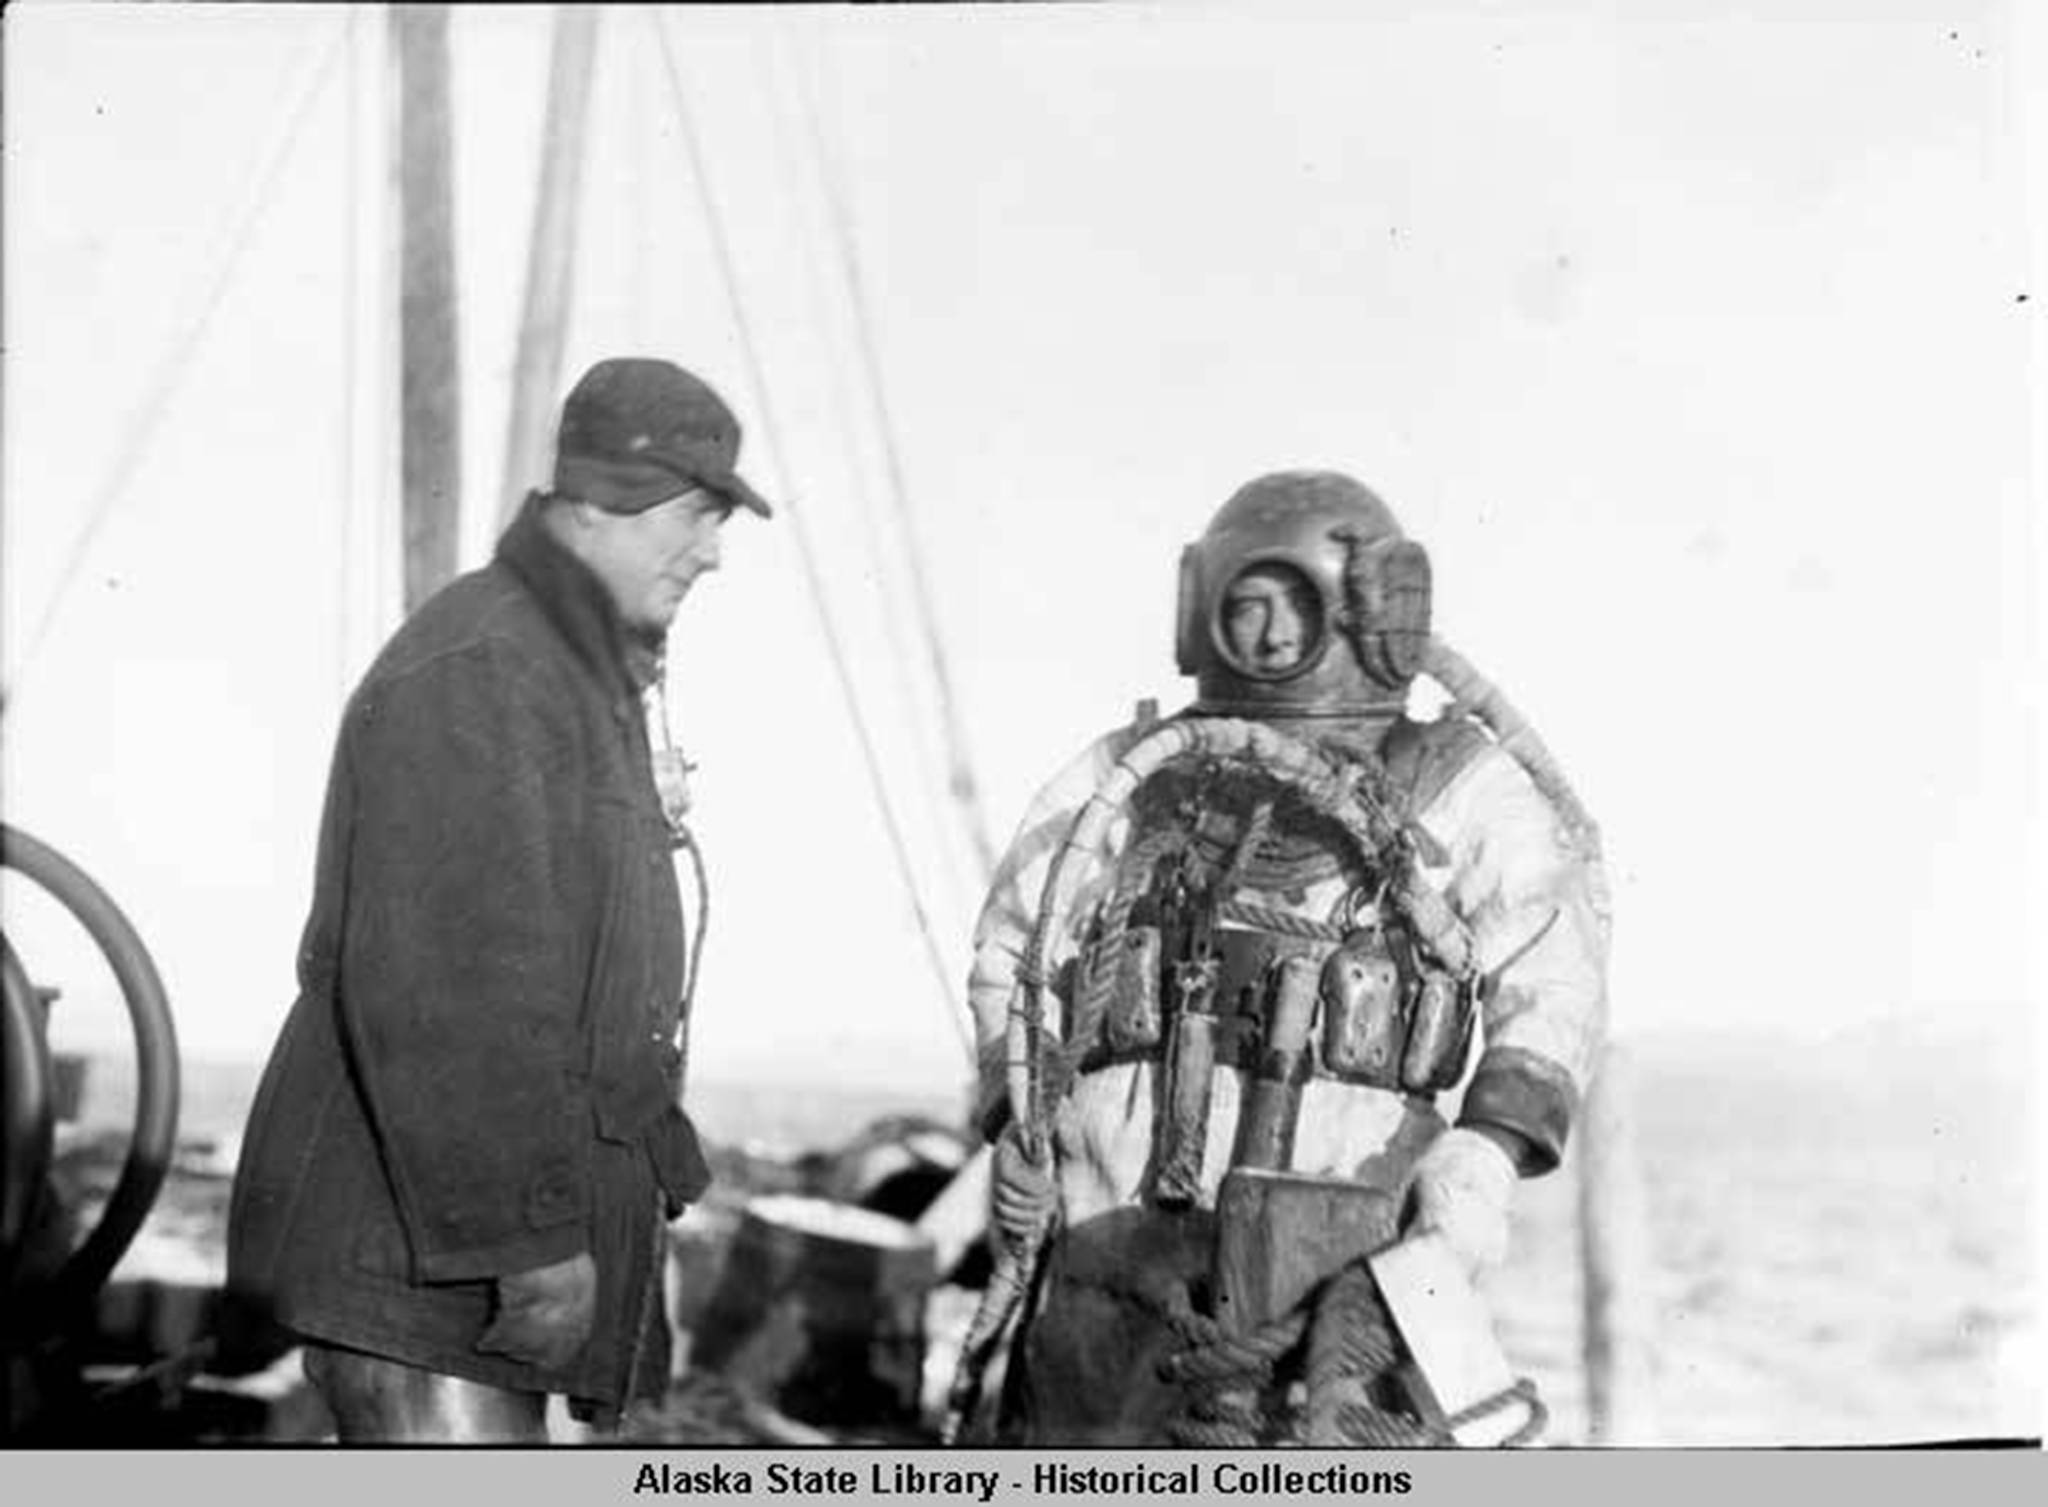 Diver in helmet and diving suit, preparing to descend to the Princess Sophia. (Alaska State Library Historical Collection, ASL-P87-1718)